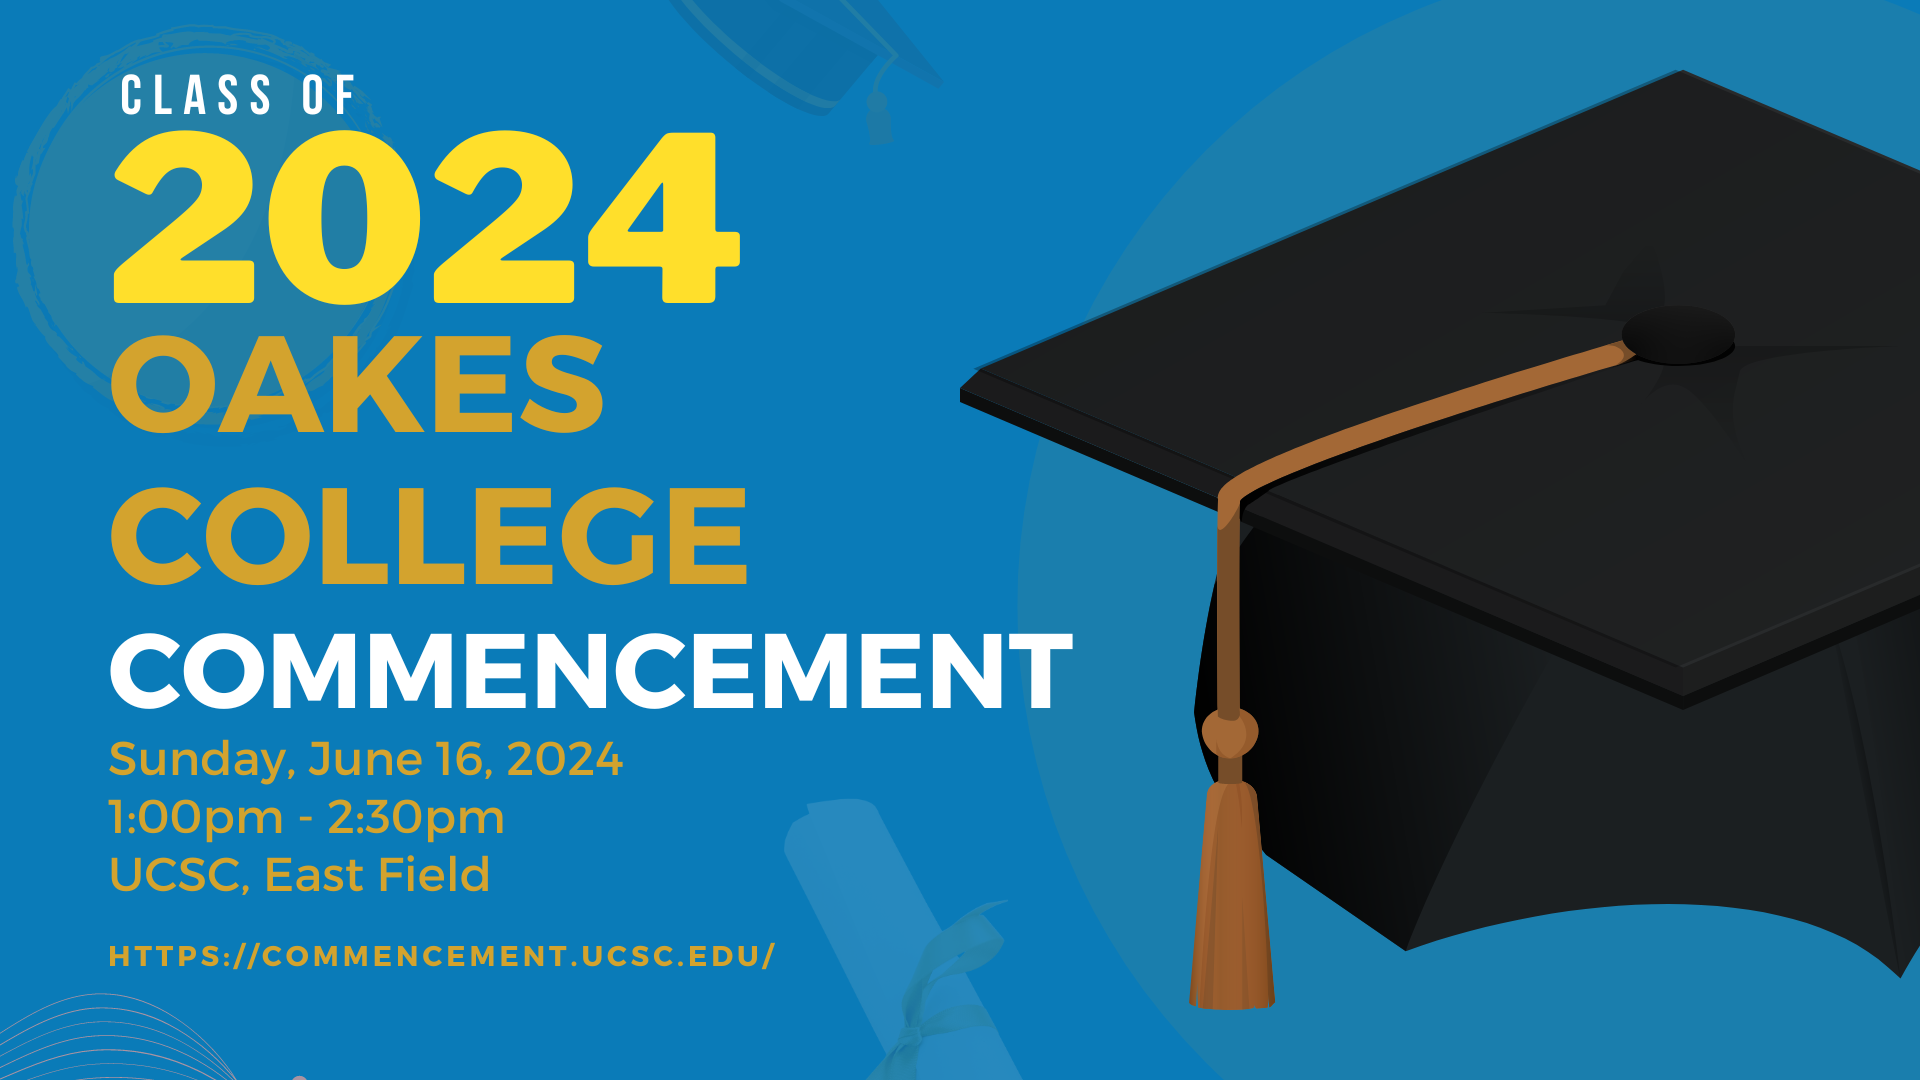 Class of 2024, Oakes College, Commencement, Sunday, June 16, 2024, 1:00pm to 2:30pm. UCSC, East Field. https://commencement.ucsc.edu/index.html